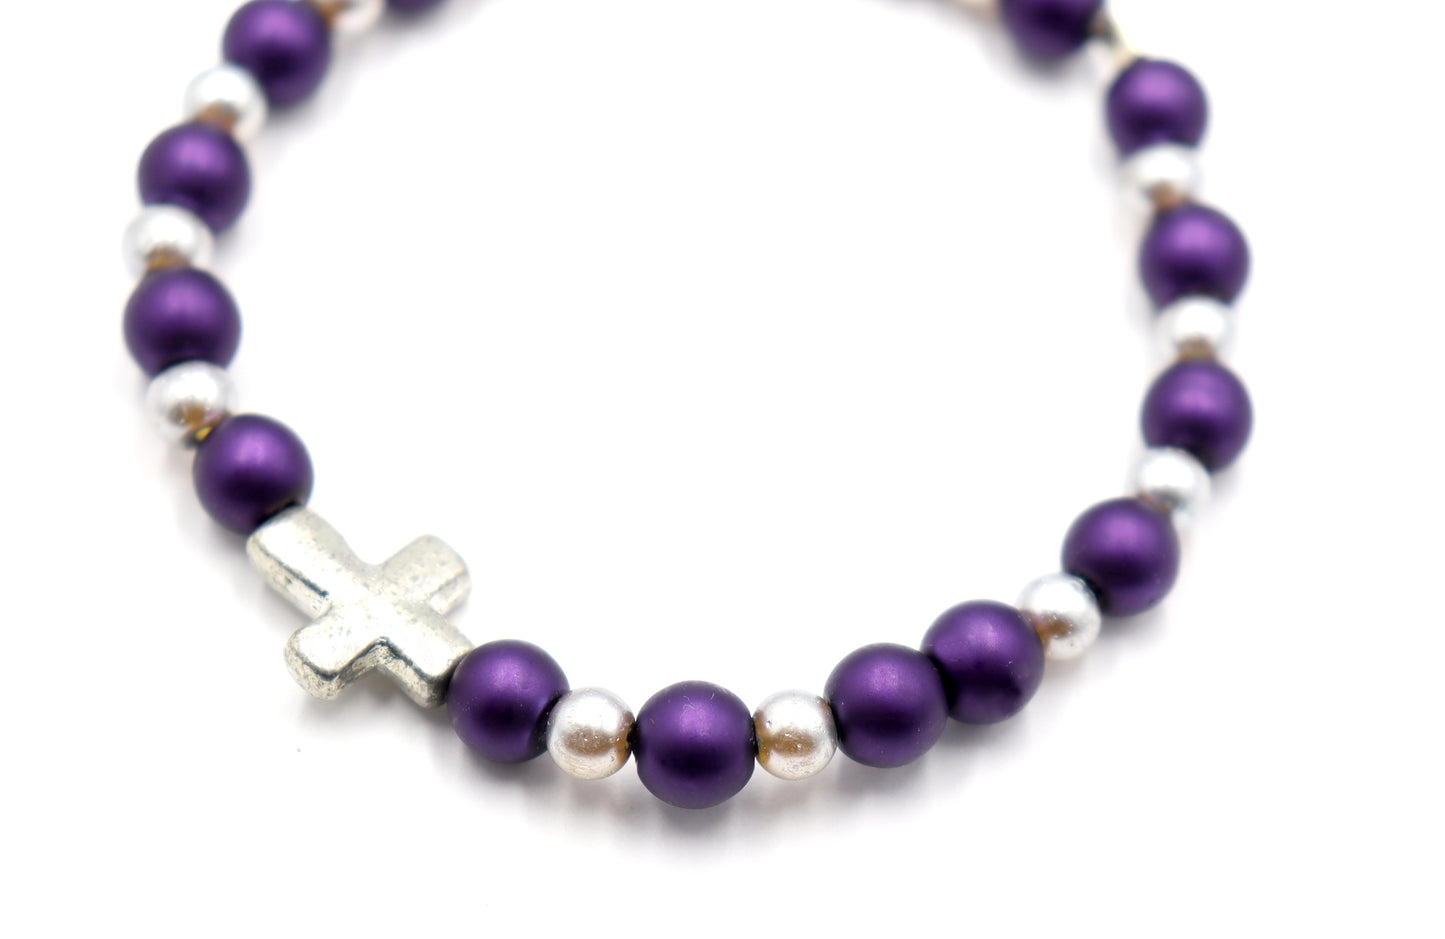 Royal Purple and Silver Pearl Glass Beads with Silver Tone Metallic Cross Stretch Bracelet by Monkey's Mojo